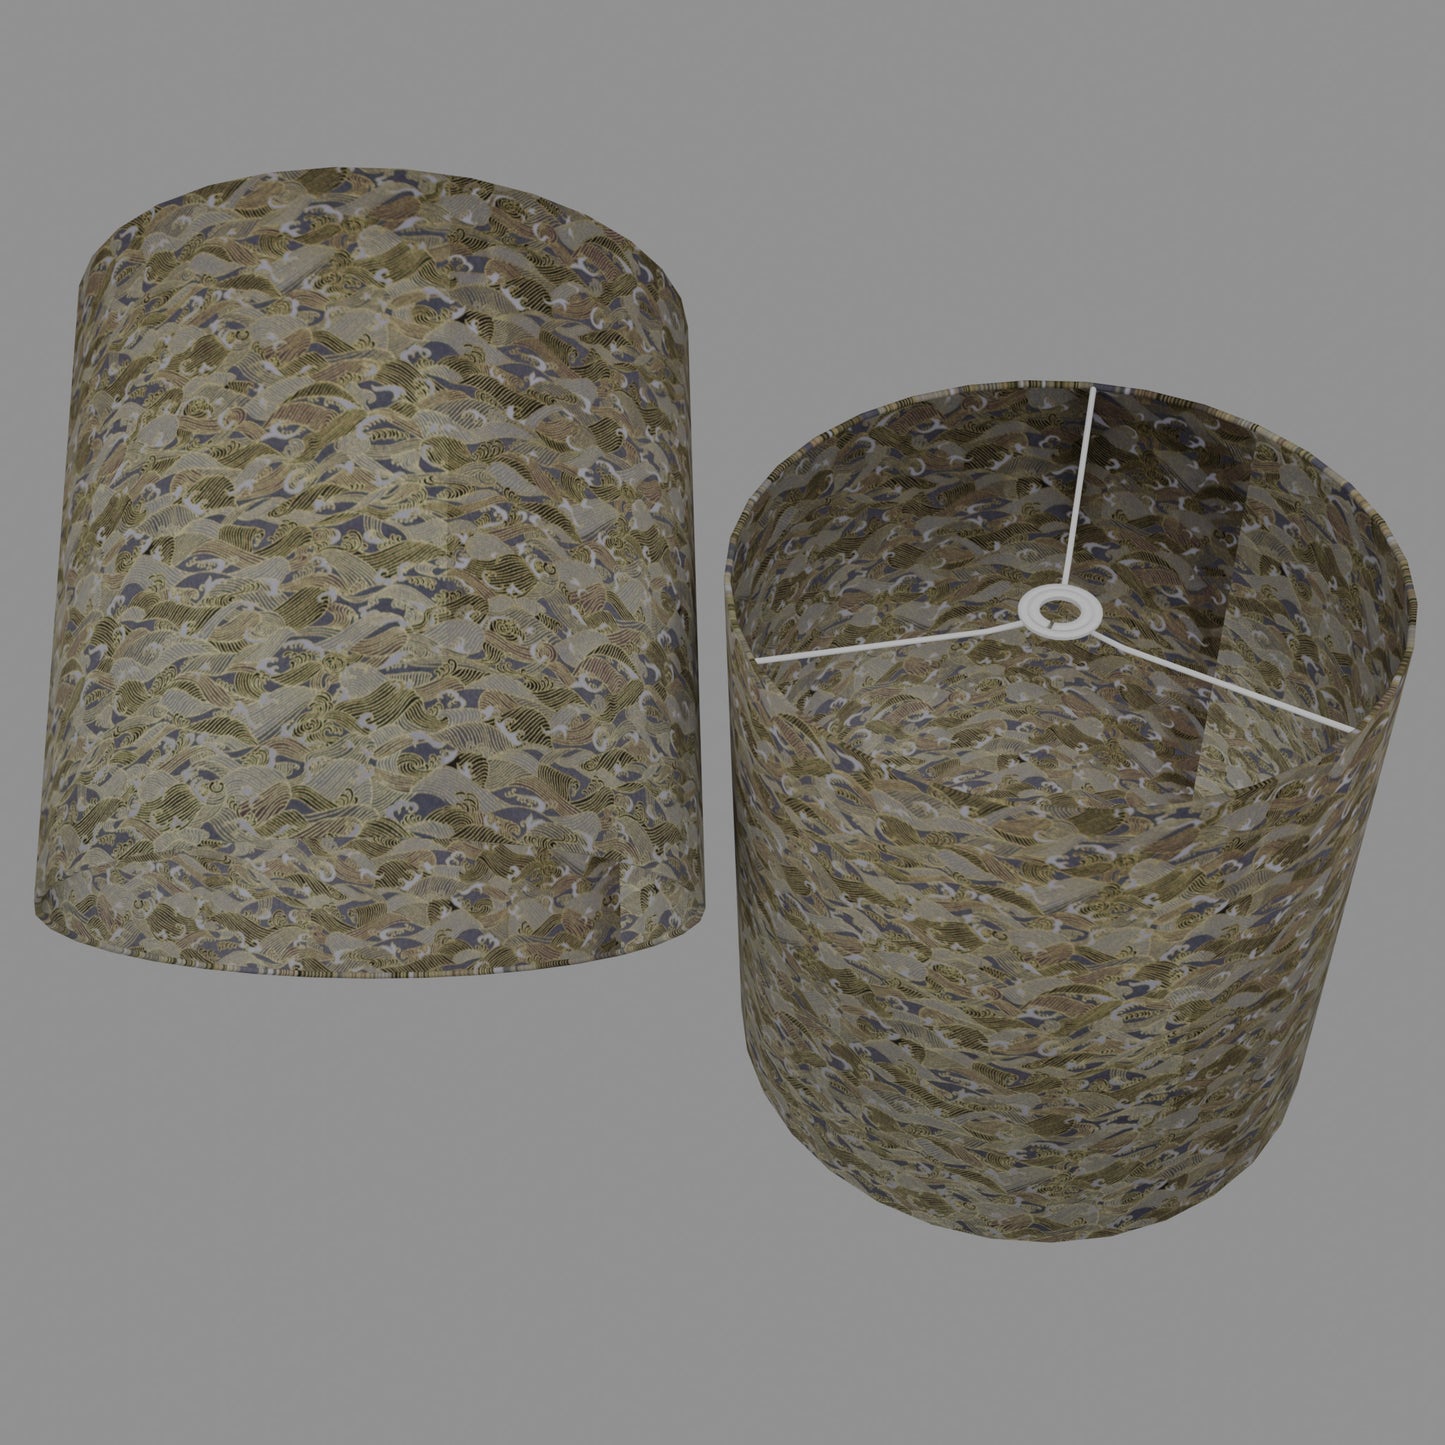 Drum Lamp Shade - W03 ~ Gold Waves on Greys, 40cm(d) x 40cm(h)